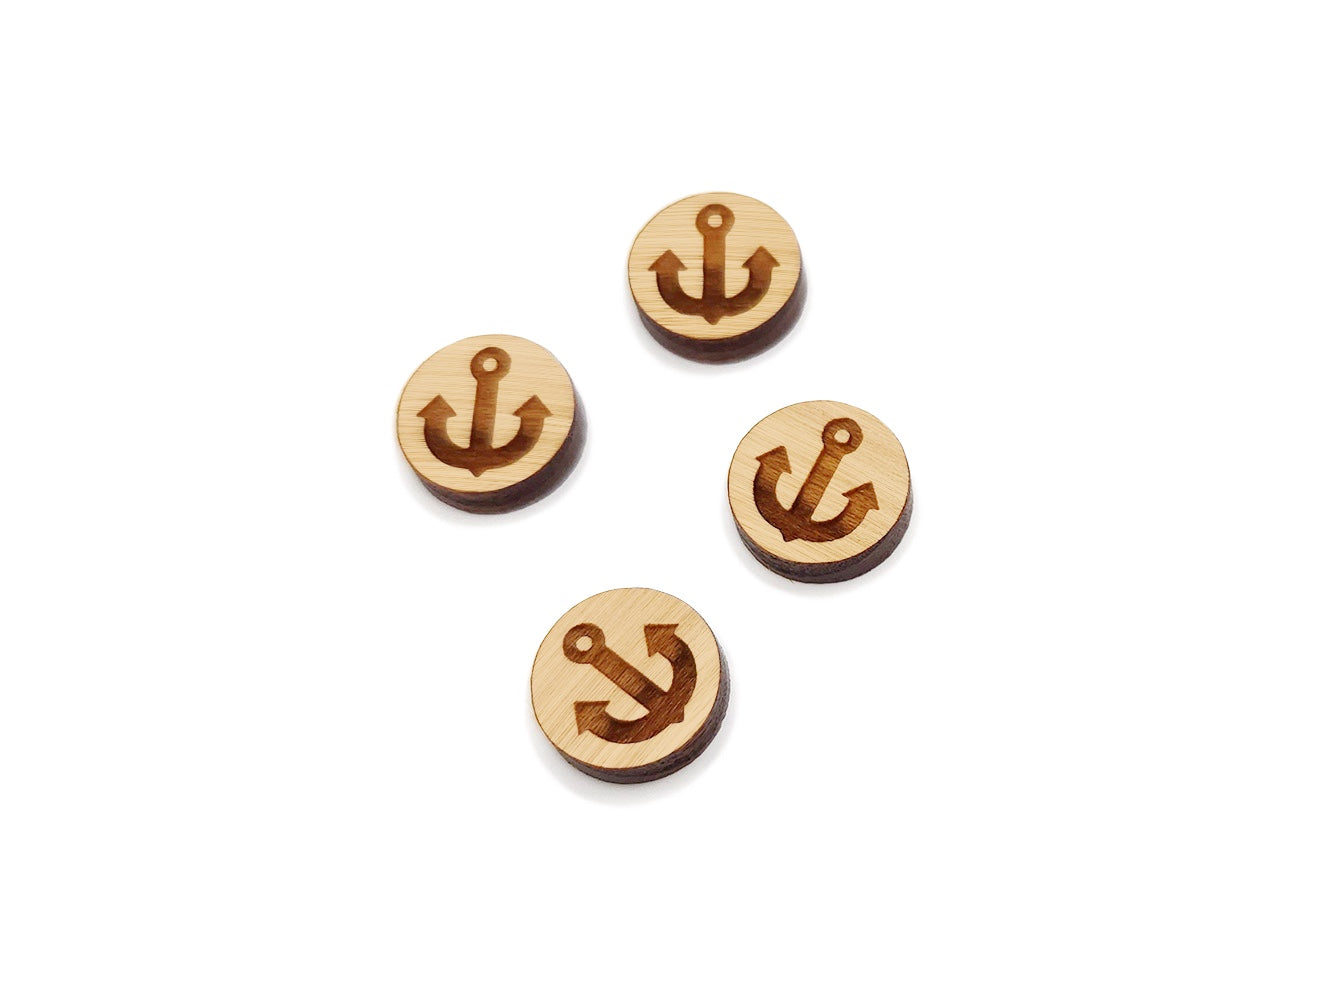 two pairs of round wooden cabochon earring blanks engraved with an anchor silhouette